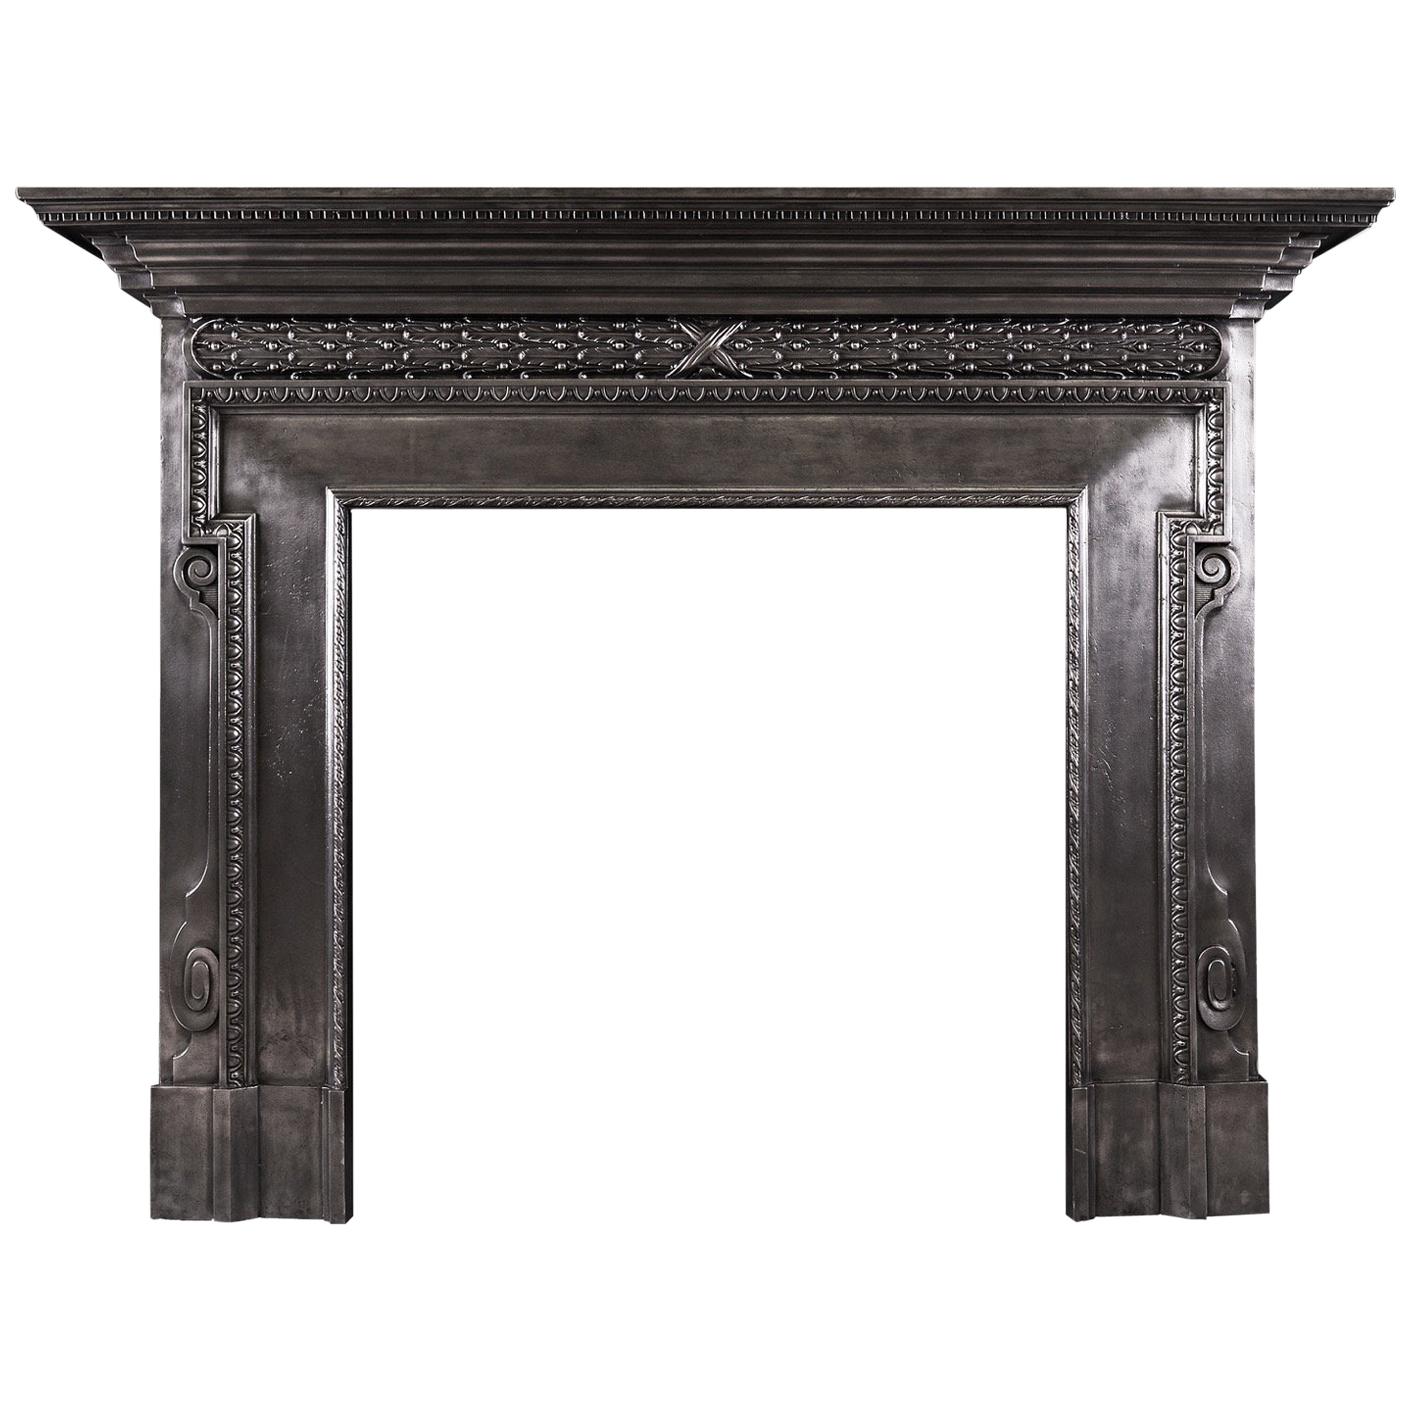 Polished Cast Iron Fireplace in the Mid Georgian Style For Sale